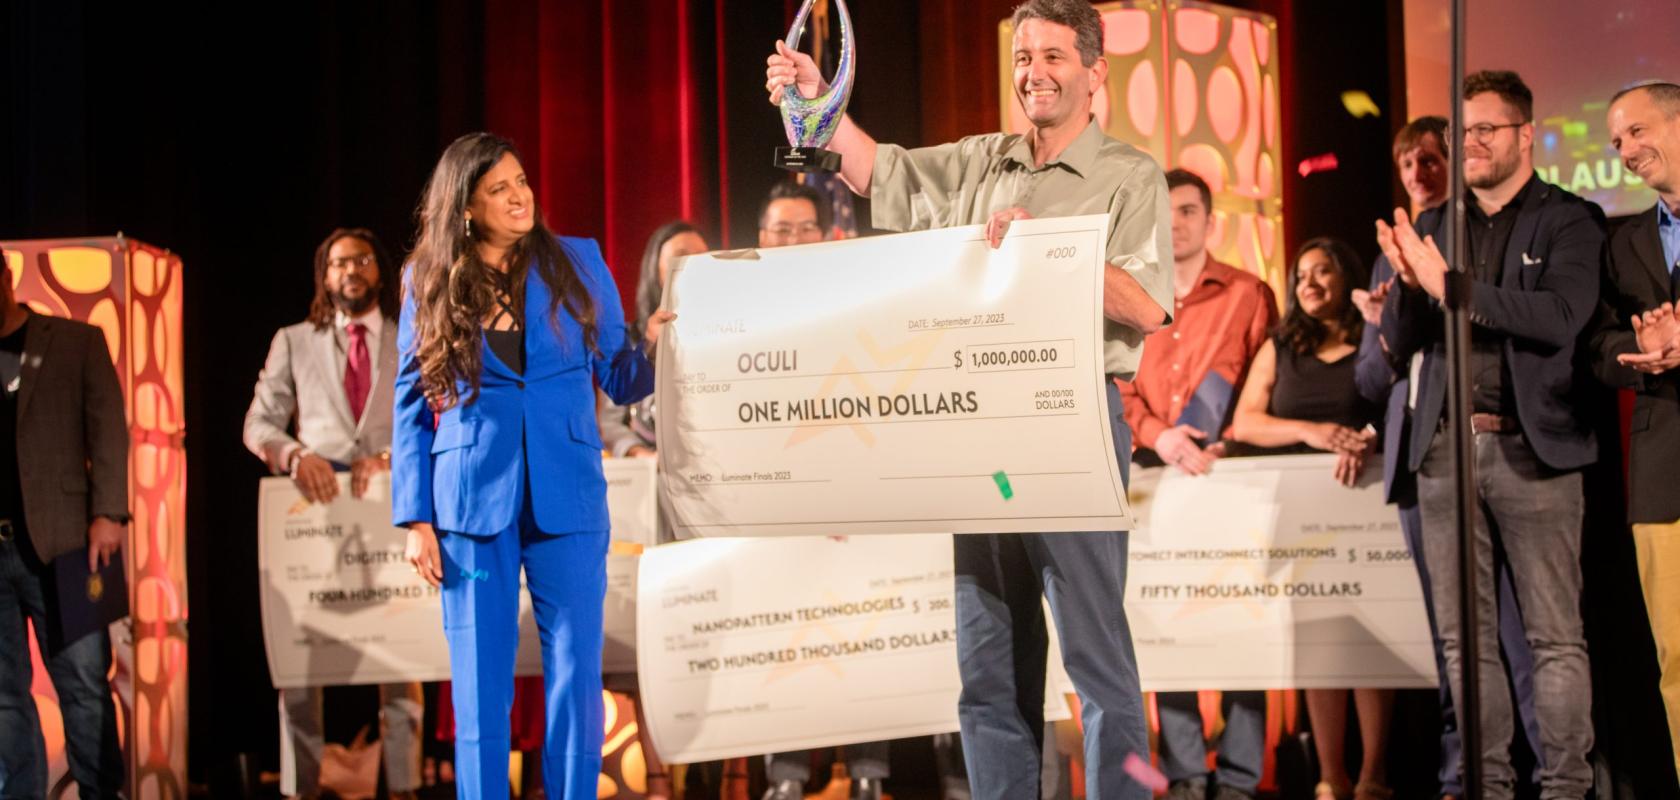 Charbel Rizk from Oculi picked up $1m in follow-on funding at the Luminate Finals 23